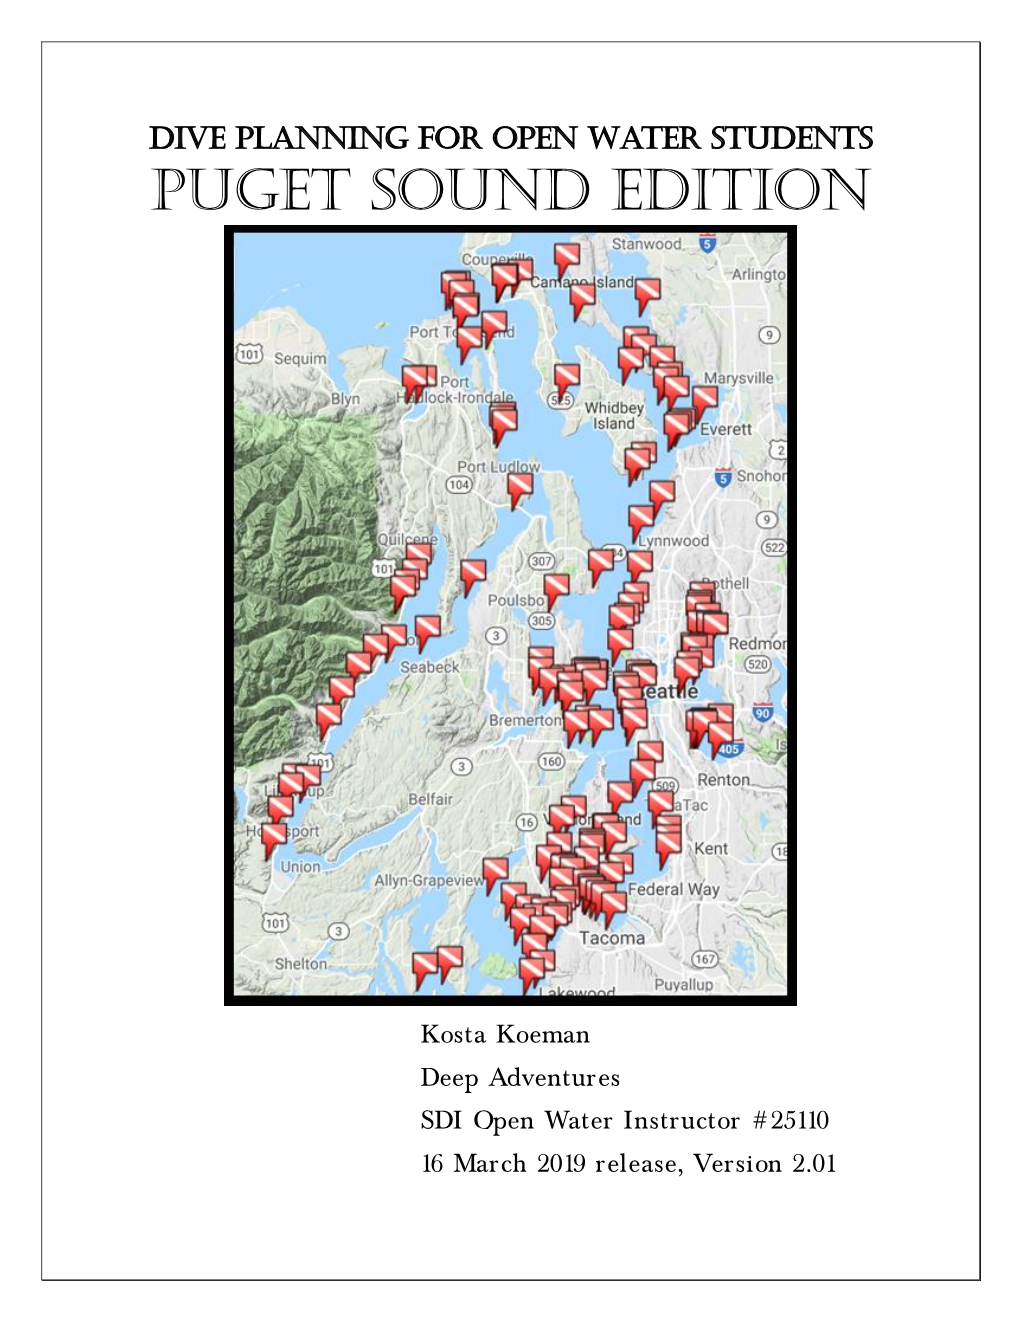 Dive Planning for Open Water Students, Puget Sound Edition